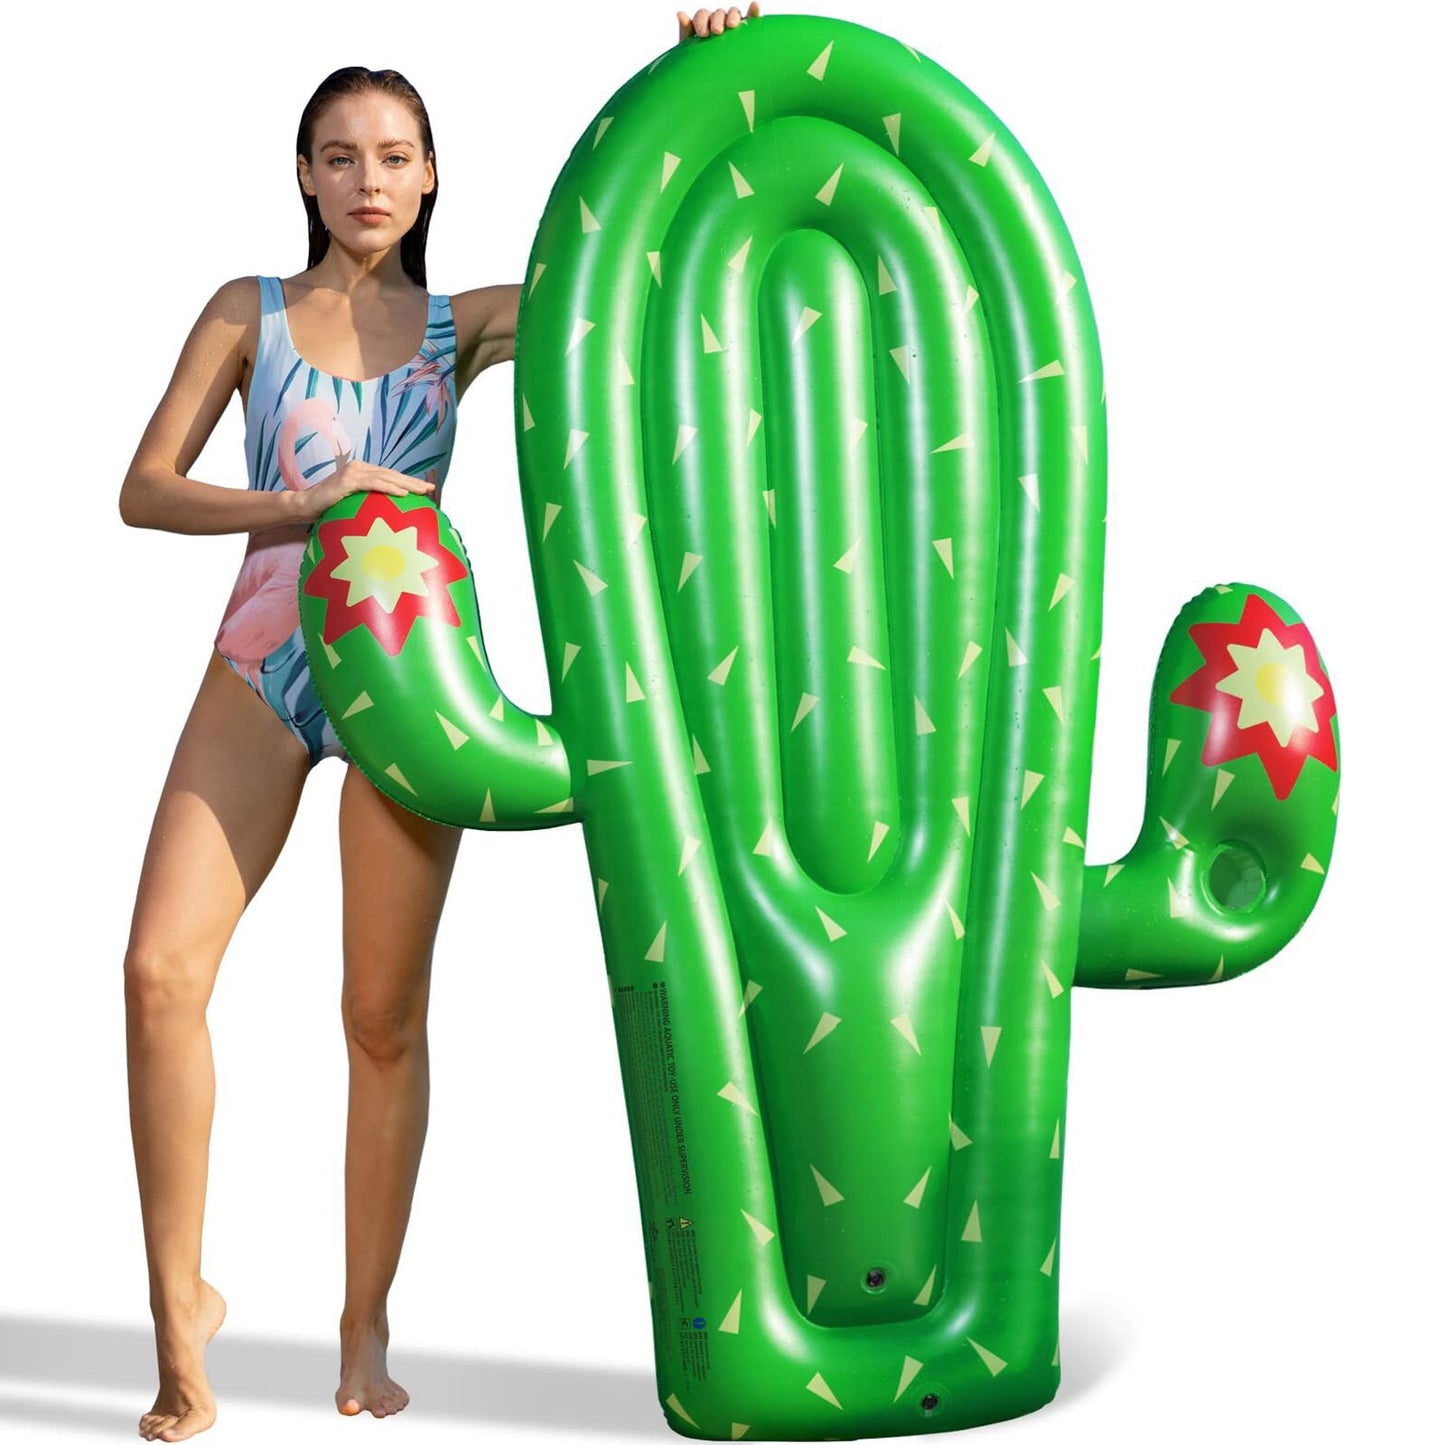 Jasonwell Giant Cactus Pineapple Pool Party Float Raft Summer Beach Swimming Pool Inflatable Floatie Lounge Pool Lounger Party Water Toys Pool Raft for Kids Adults